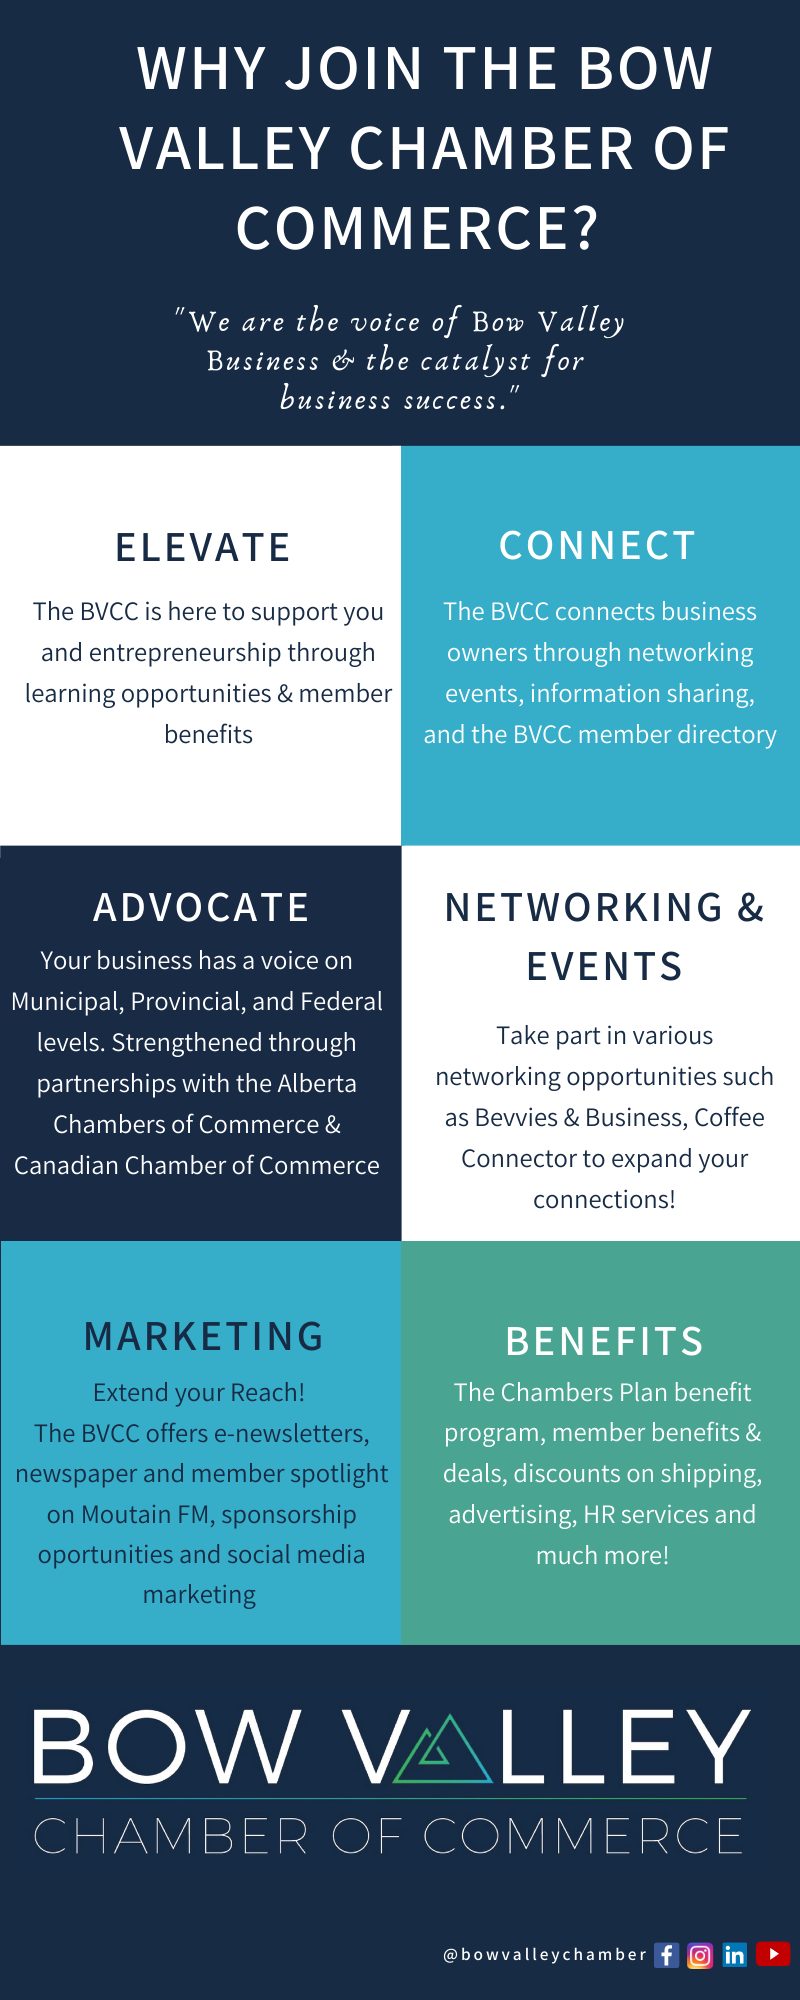 Copy of 2021 BVCC Why Join Infographic